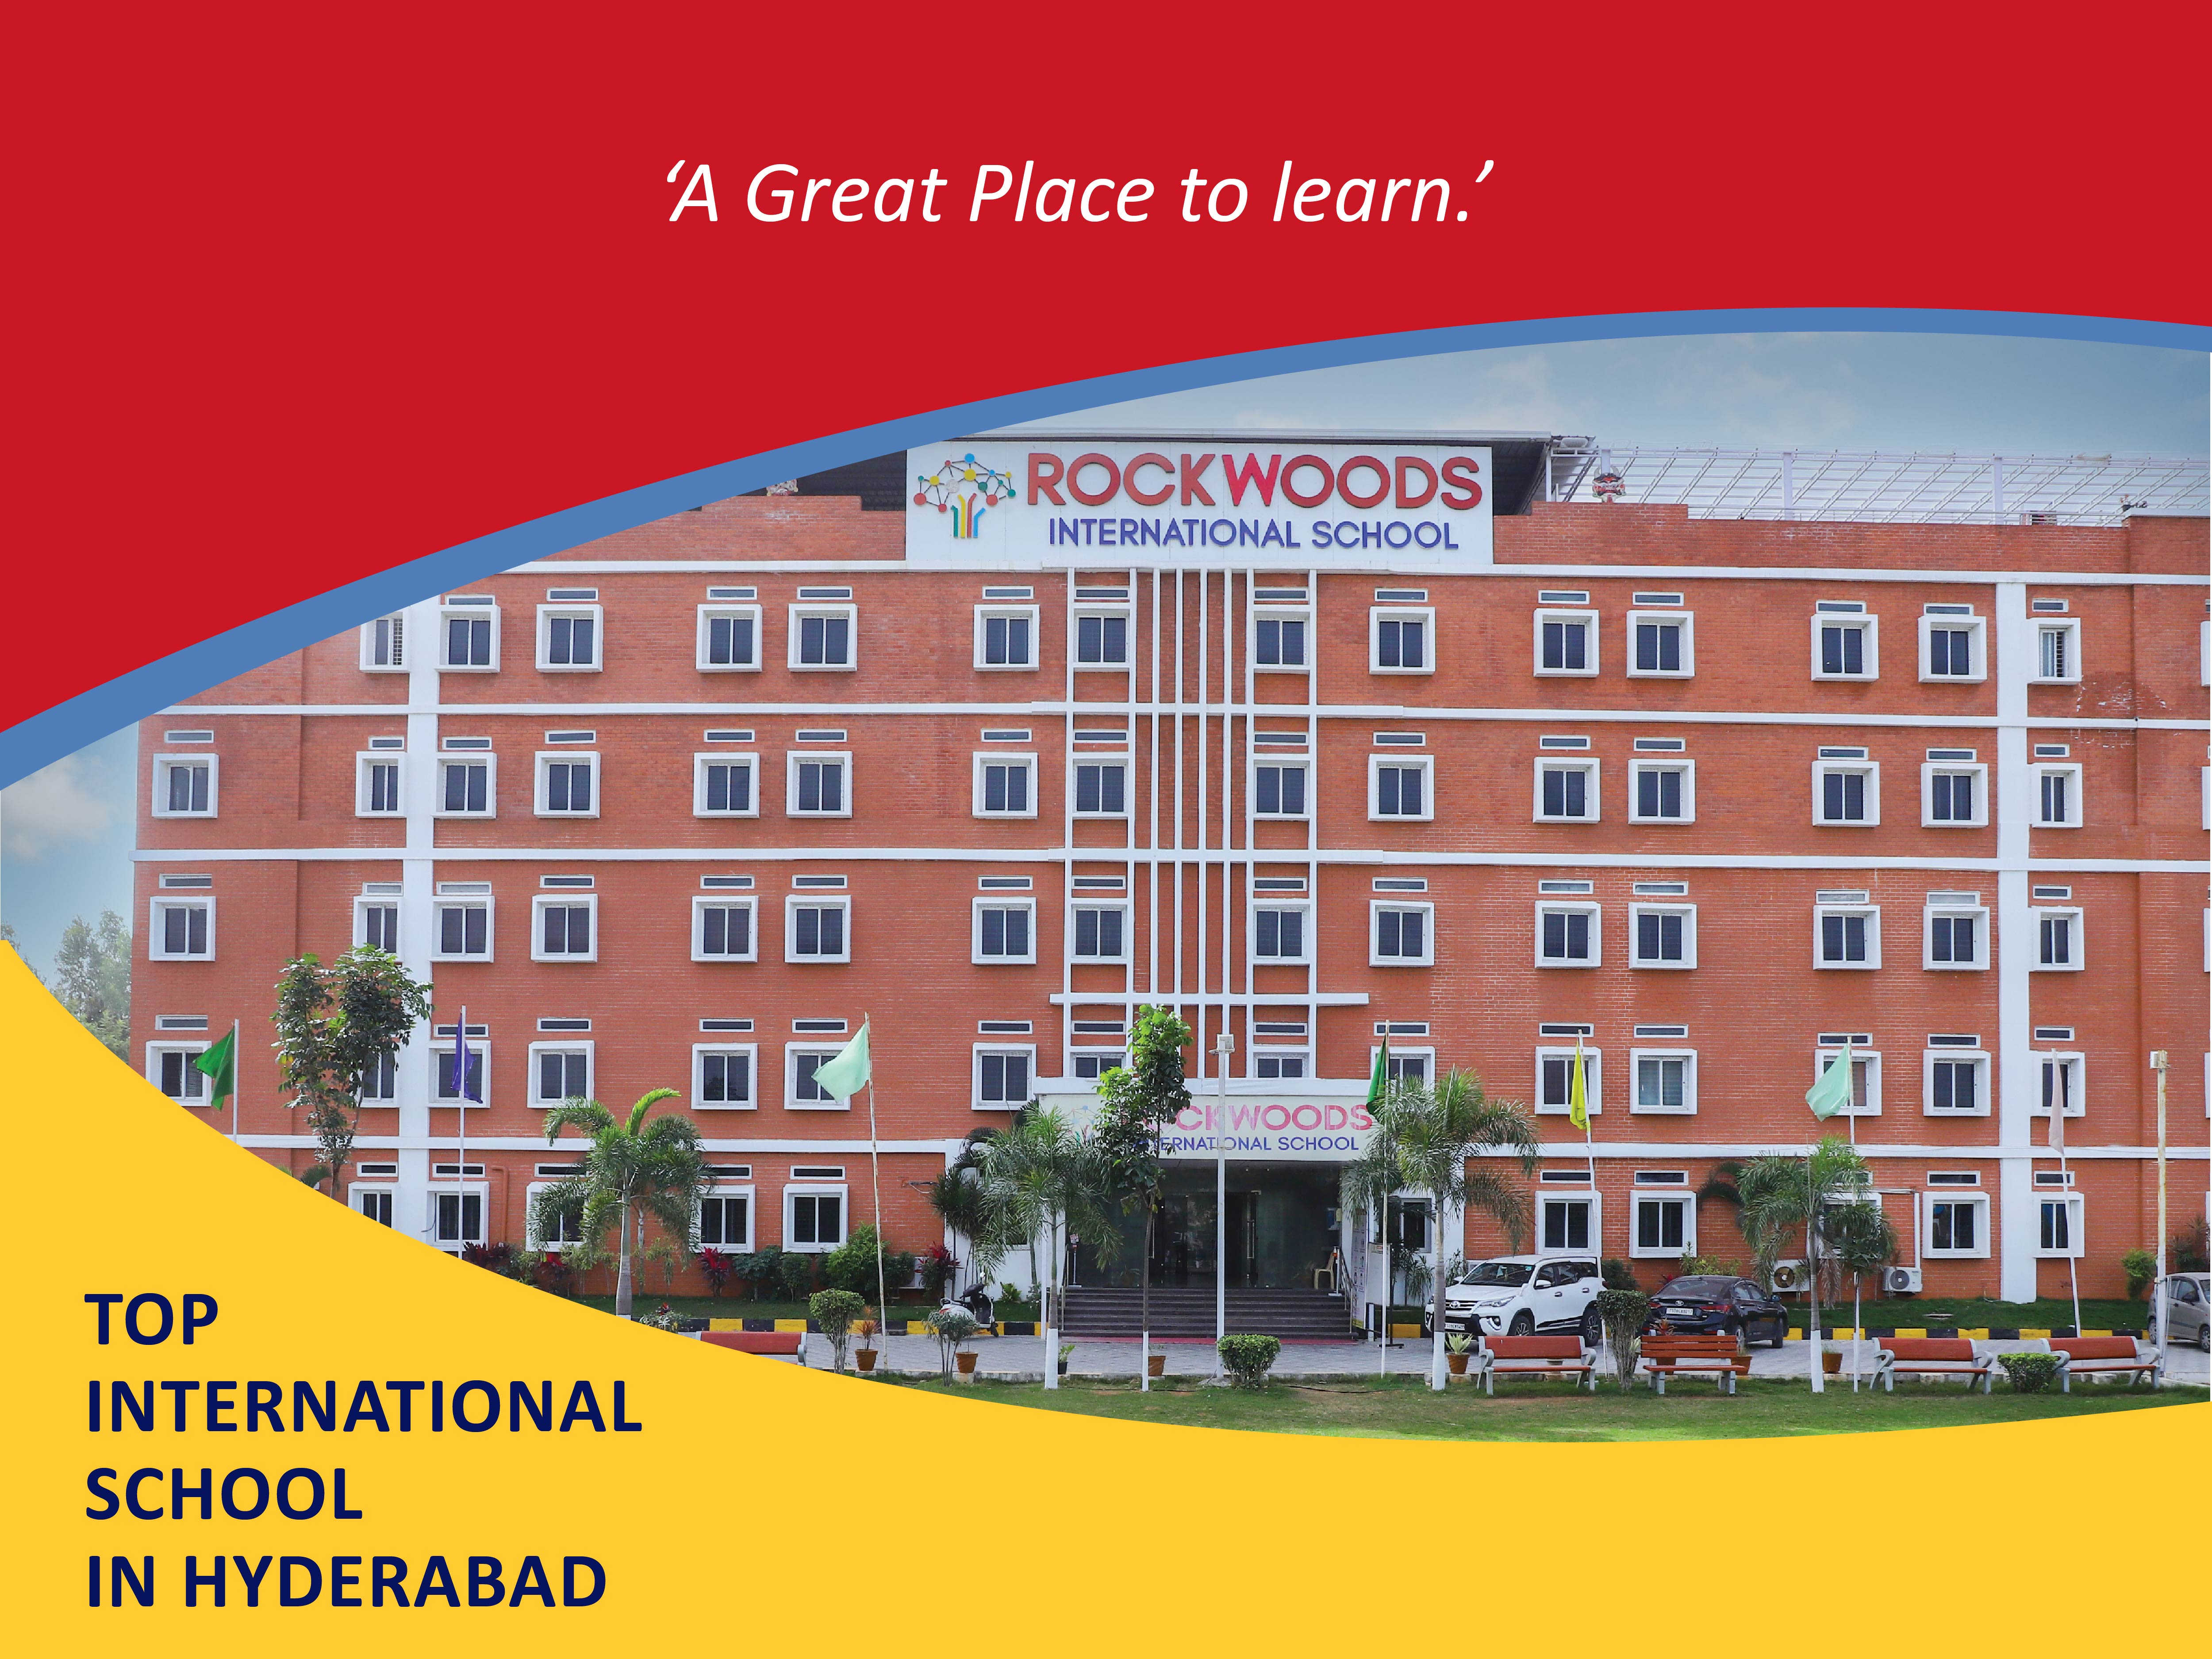 Which is the top International school in Hyderabad?